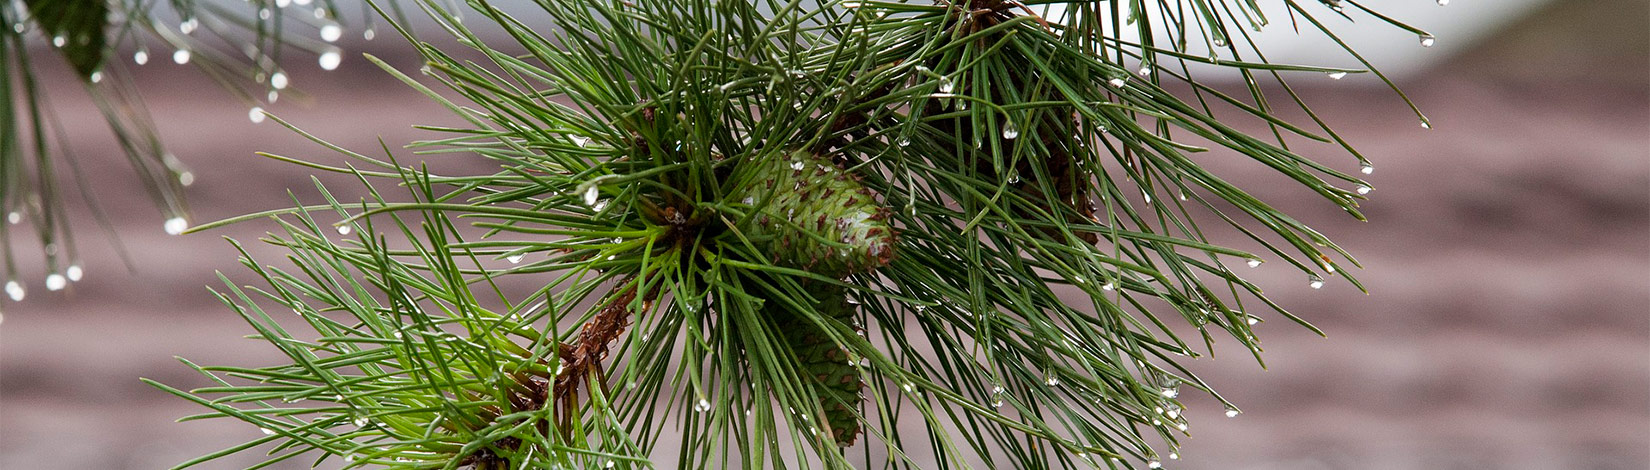 Pine cone with water droplets